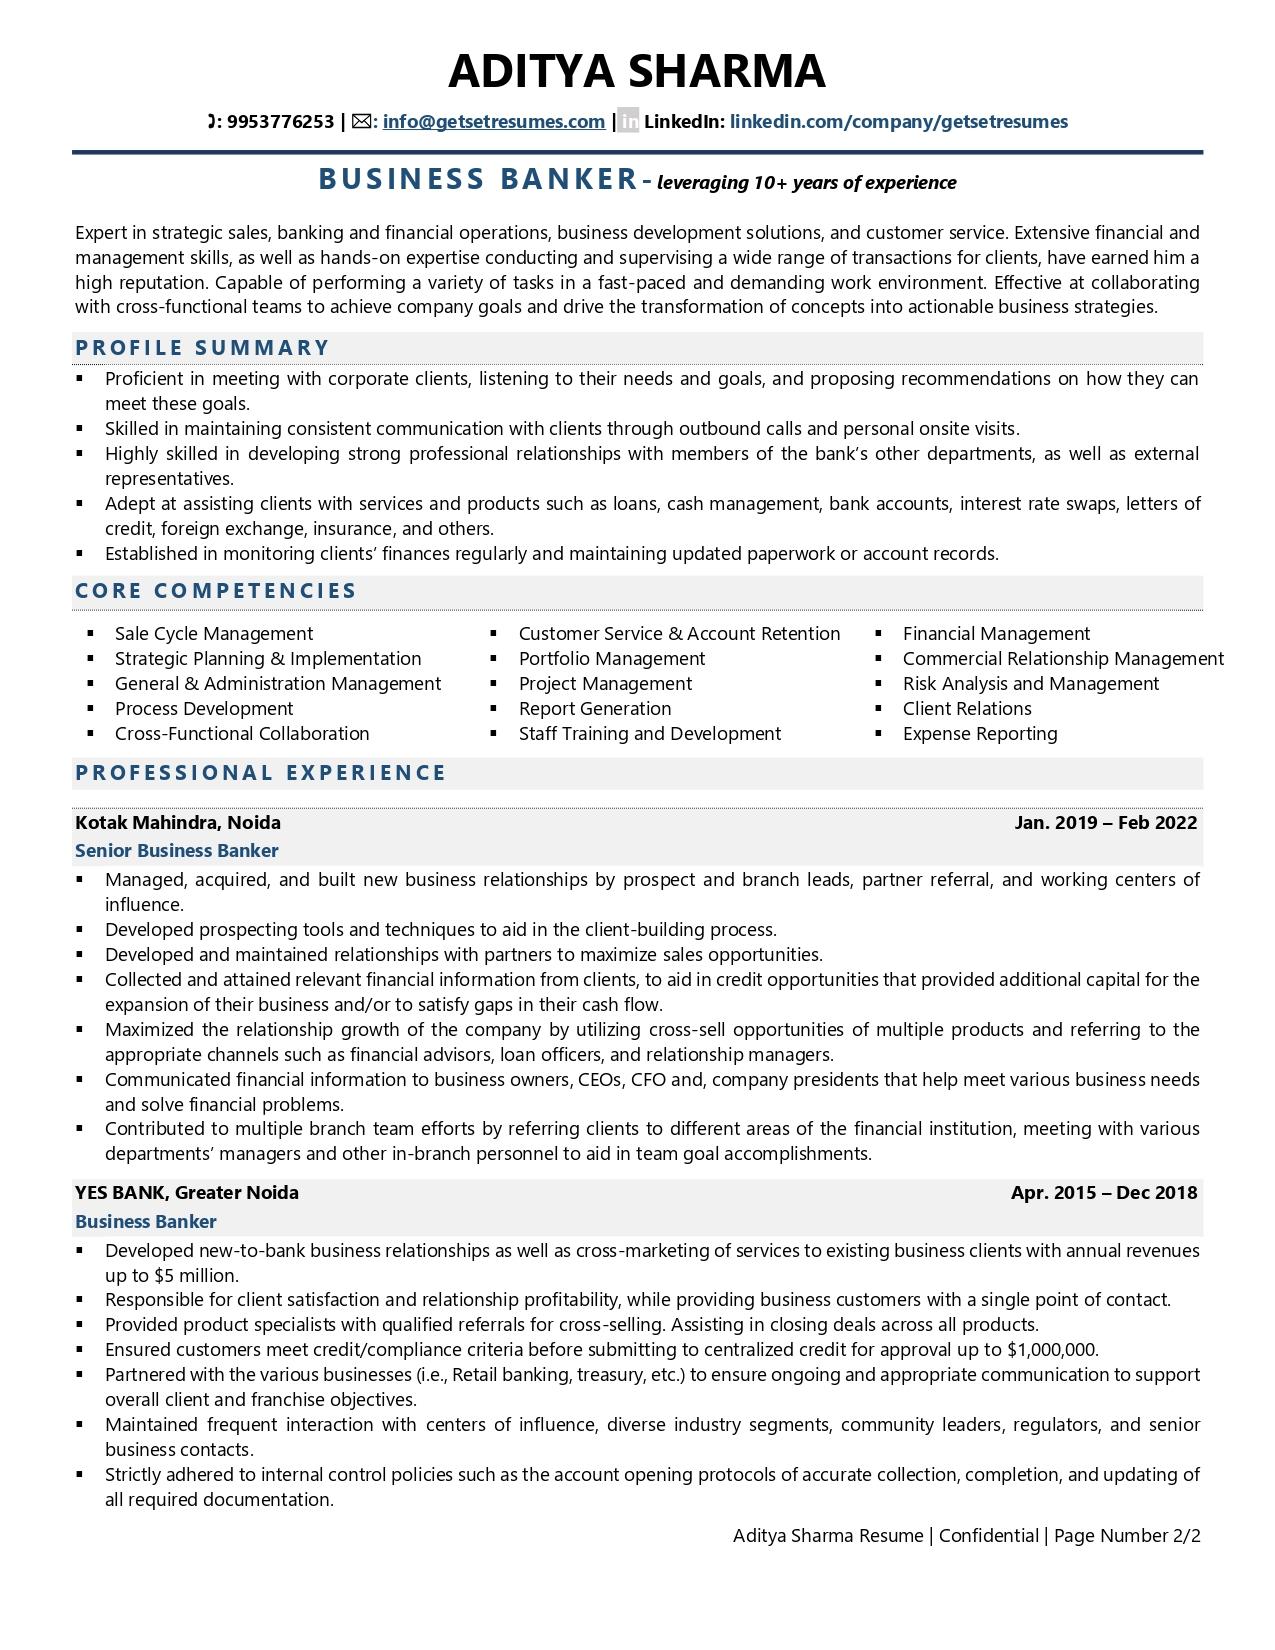 Business Banker Resume Examples & Template (with job winning tips)